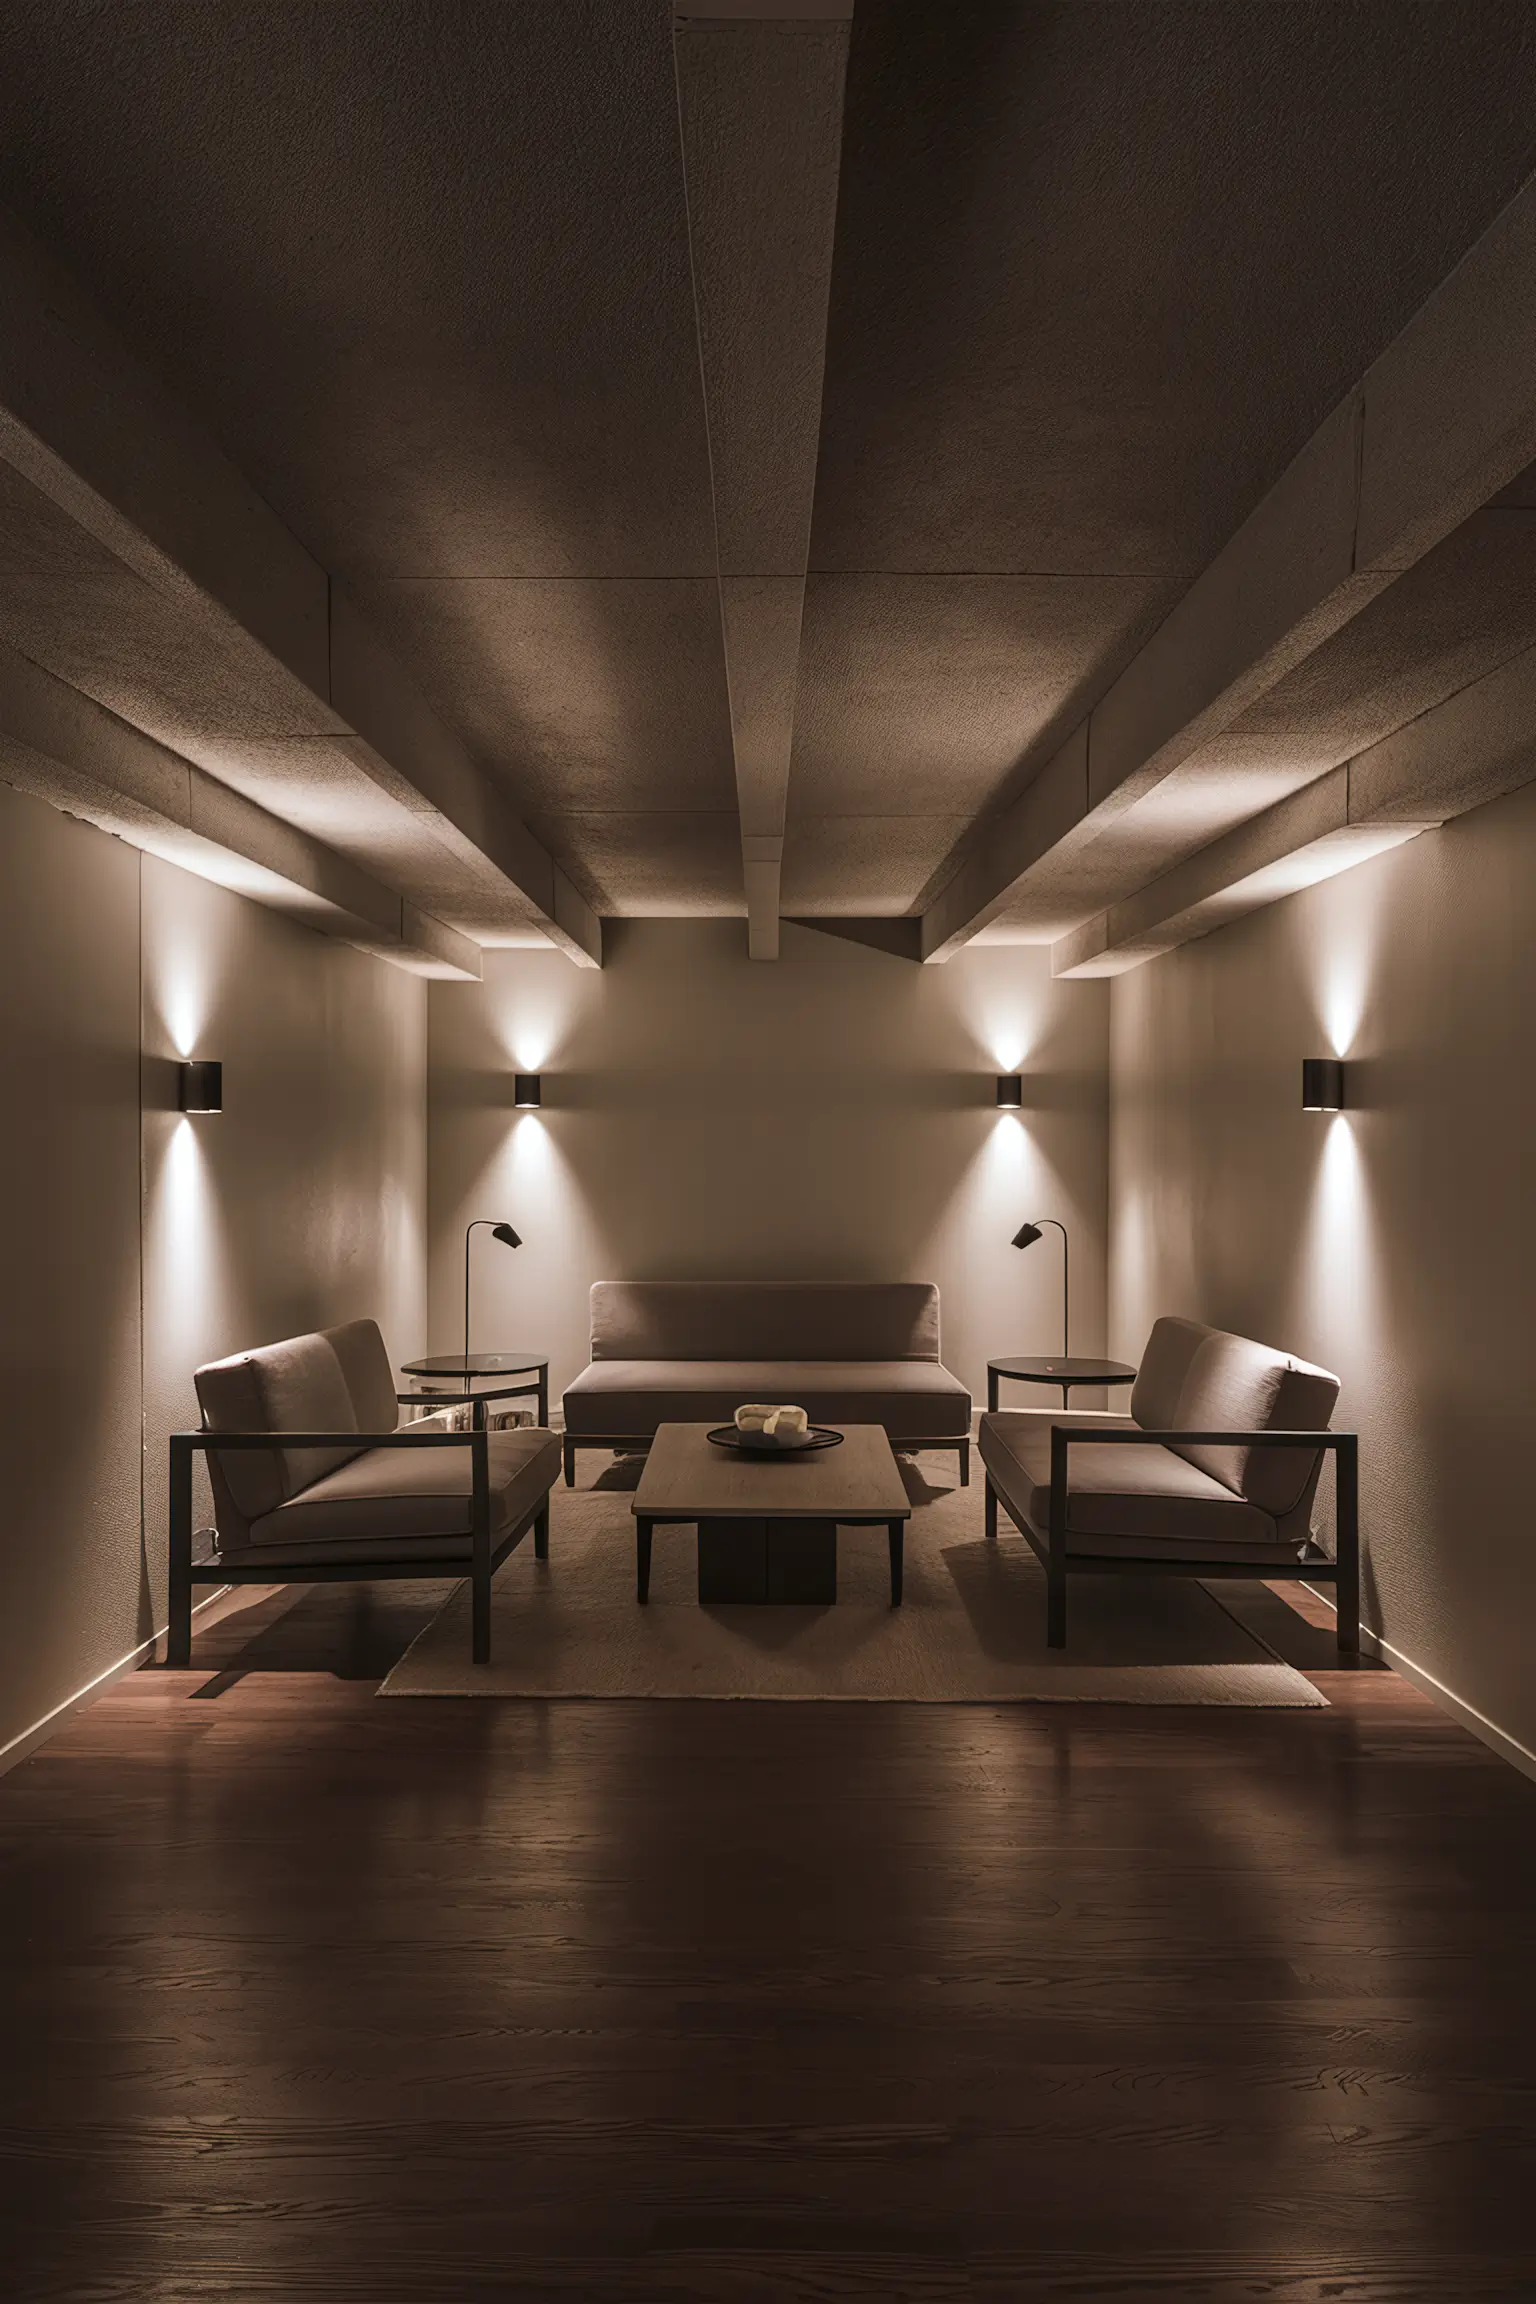 Minimalistic basement with low ceilings featuring strategic lighting and low-profile furniture.